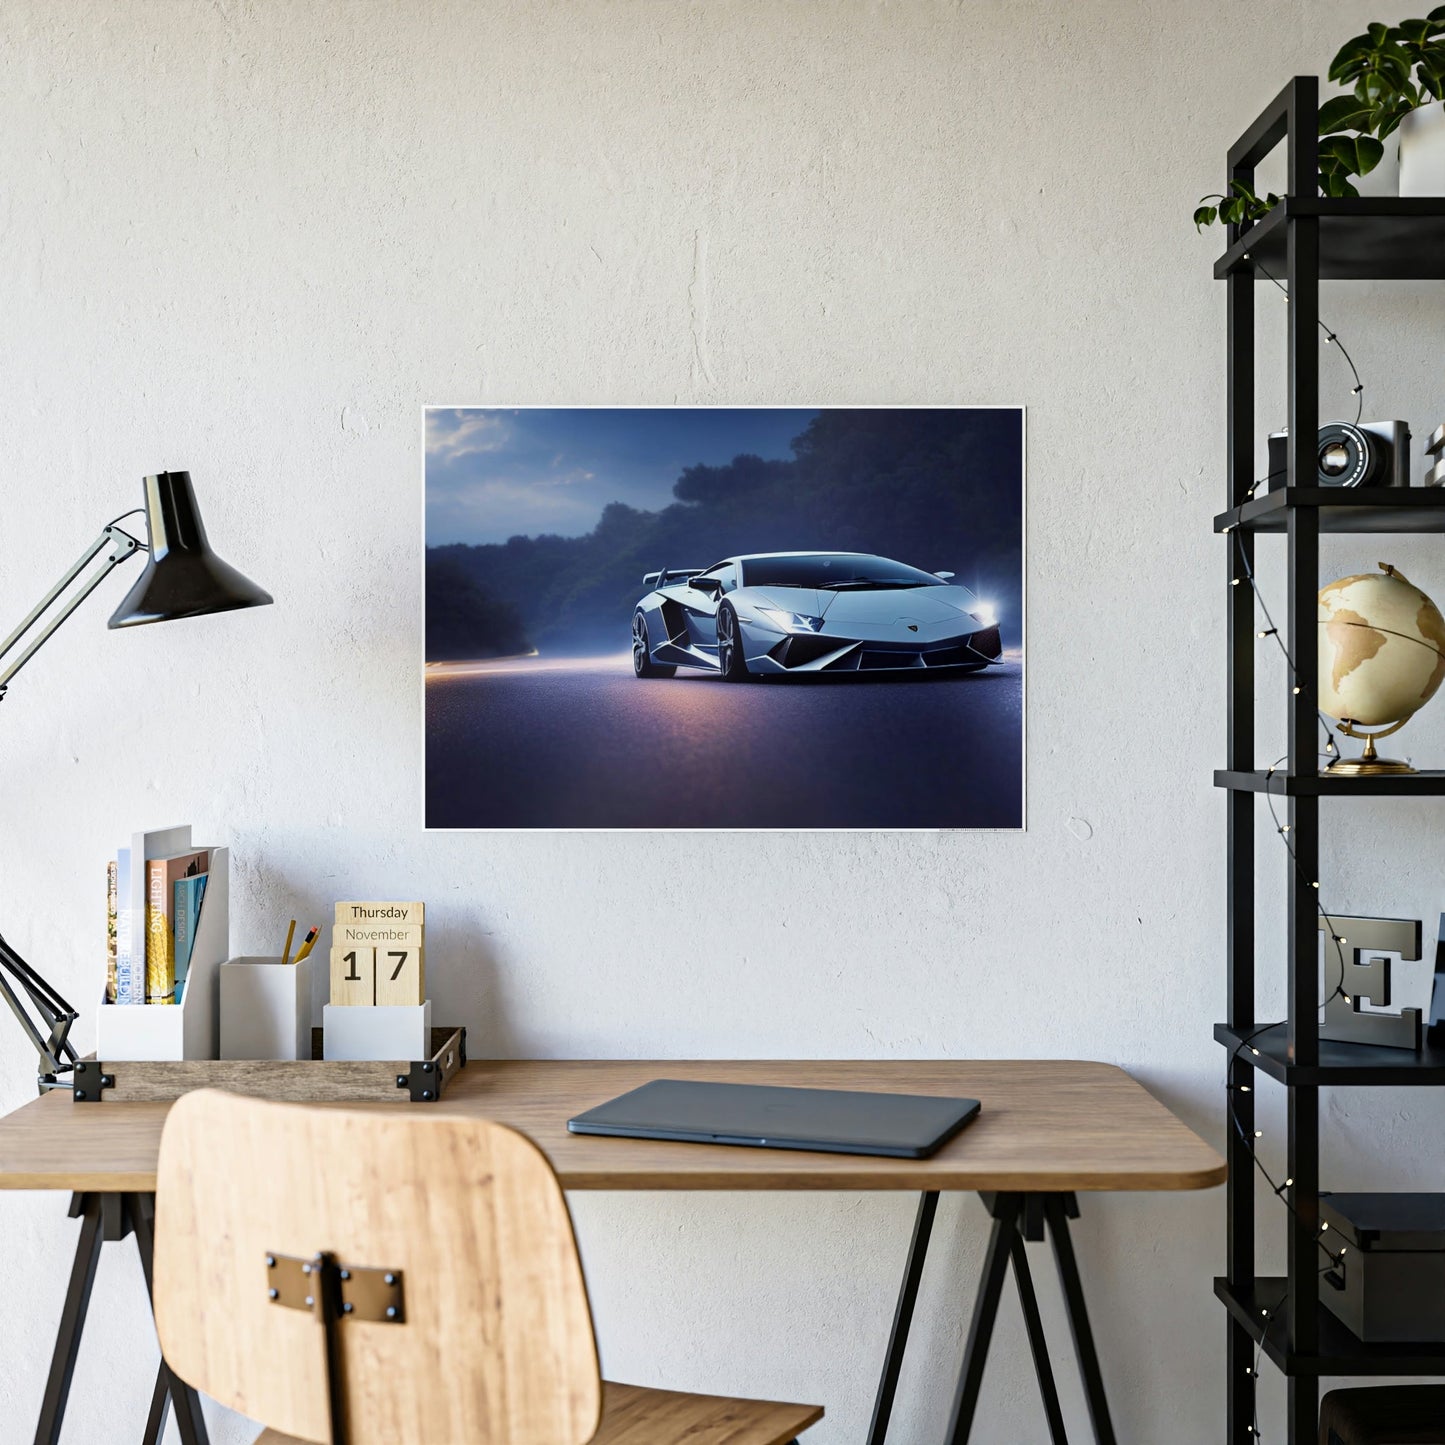 Power and Style: Lamborghini Print on Framed Canvas & Poster for Automotive Art Fans